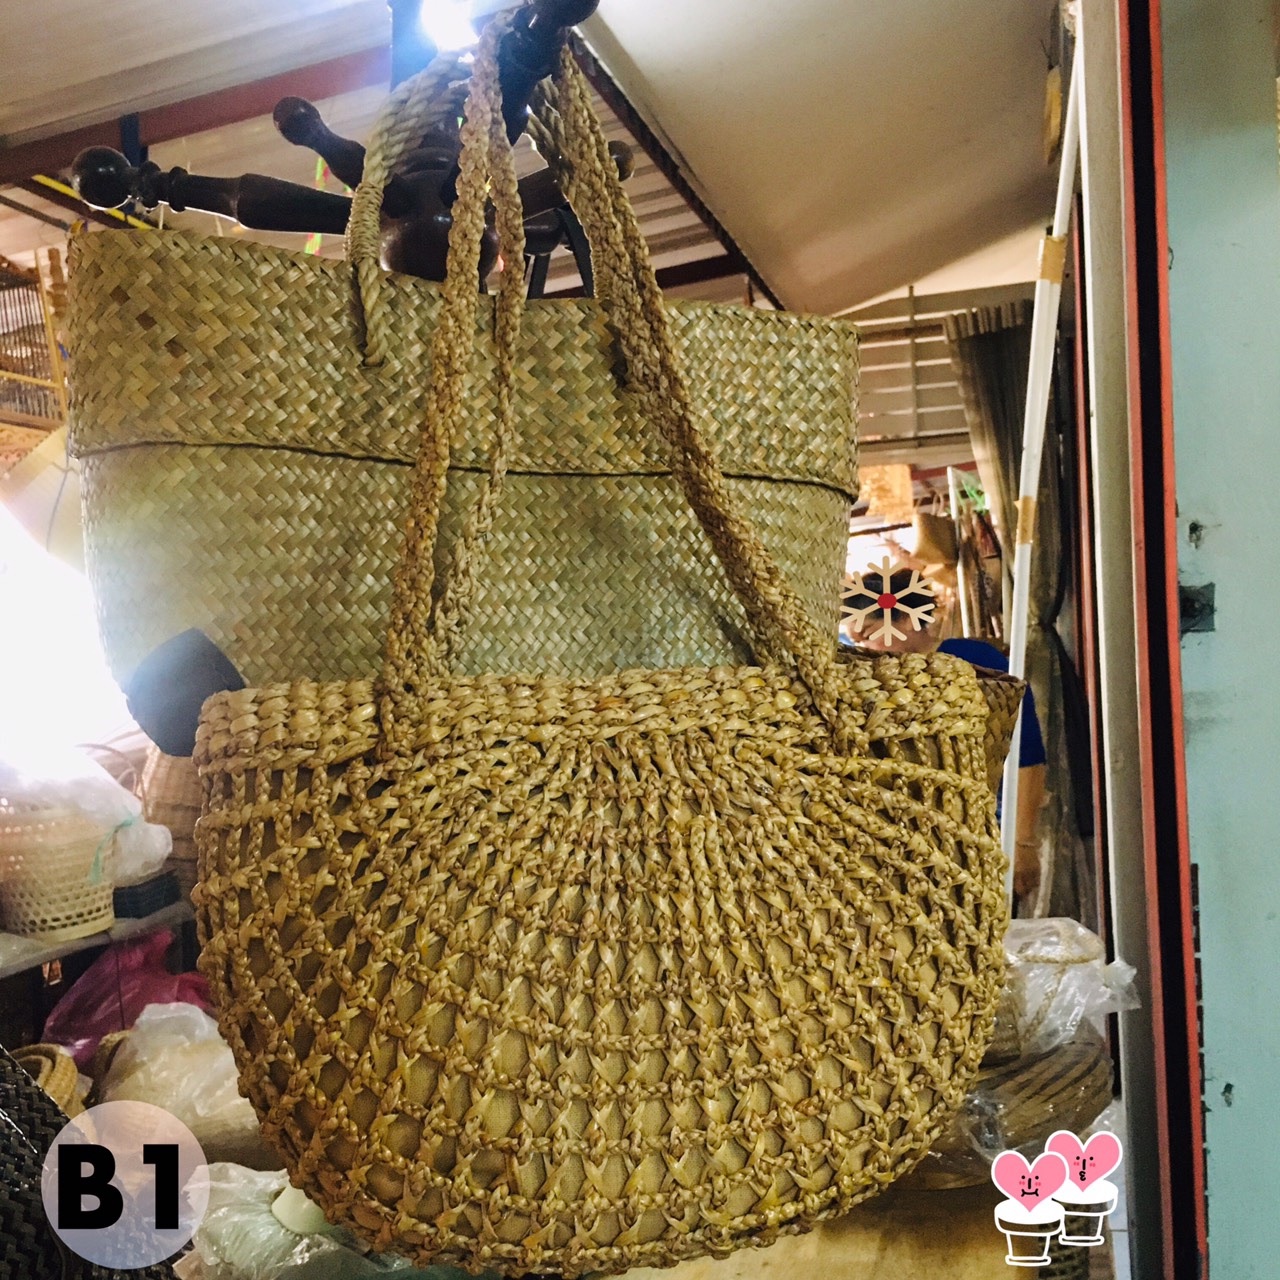 Handmade Water Hyacinth Bags at Best Price in Guwahati | Fabsner Commerce  Llp